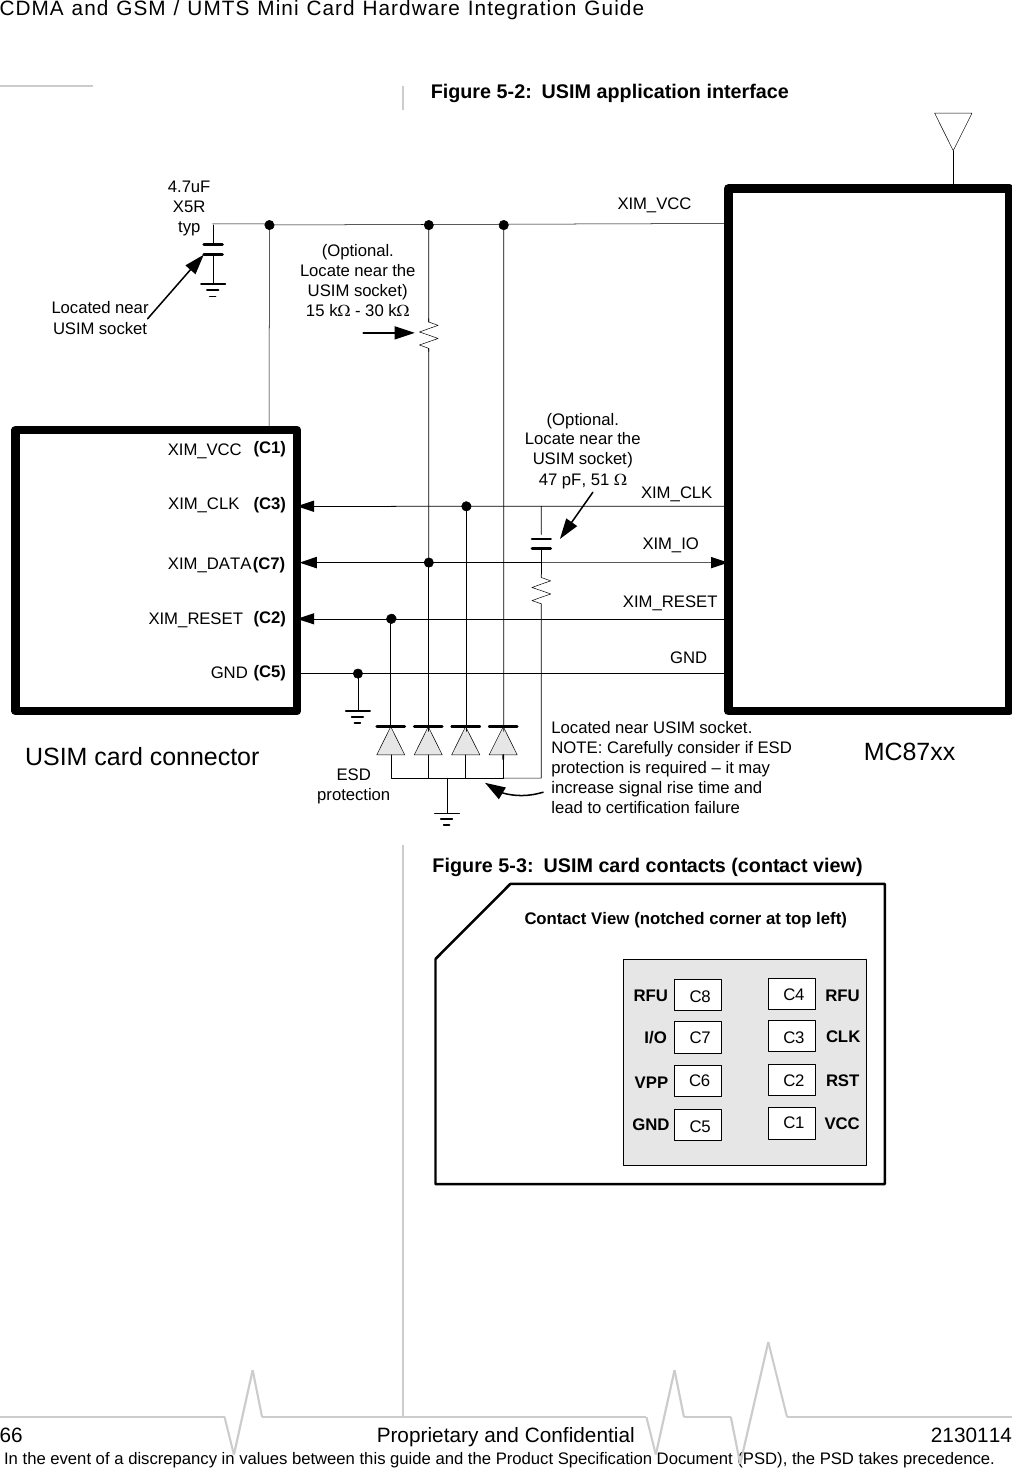 CDMA and GSM / UMTS Mini Card Hardware Integration Guide66 Proprietary and Confidential 2130114 In the event of a discrepancy in values between this guide and the Product Specification Document (PSD), the PSD takes precedence.Figure 5-2:  USIM application interfaceFigure 5-3:  USIM card contacts (contact view)MC87xxXIM_VCCXIM_RESETXIM_DATAXIM_CLKUSIM card connectorGND(Optional. Locate near the USIM socket)47 pF, 51 Ω4.7uFX5Rtyp(C1)XIM_VCCXIM_CLKXIM_IOXIM_RESETLocated near USIM socketLocated near USIM socket.NOTE: Carefully consider if ESD protection is required – it may increase signal rise time and lead to certification failureGNDESD protection(C3)(C7)(C2)(C5)(Optional. Locate near the USIM socket)15 kΩ - 30 kΩC8C7C6C5C4C3C2C1GND VCCVPP RSTI/O CLKRFU RFUContact View (notched corner at top left)